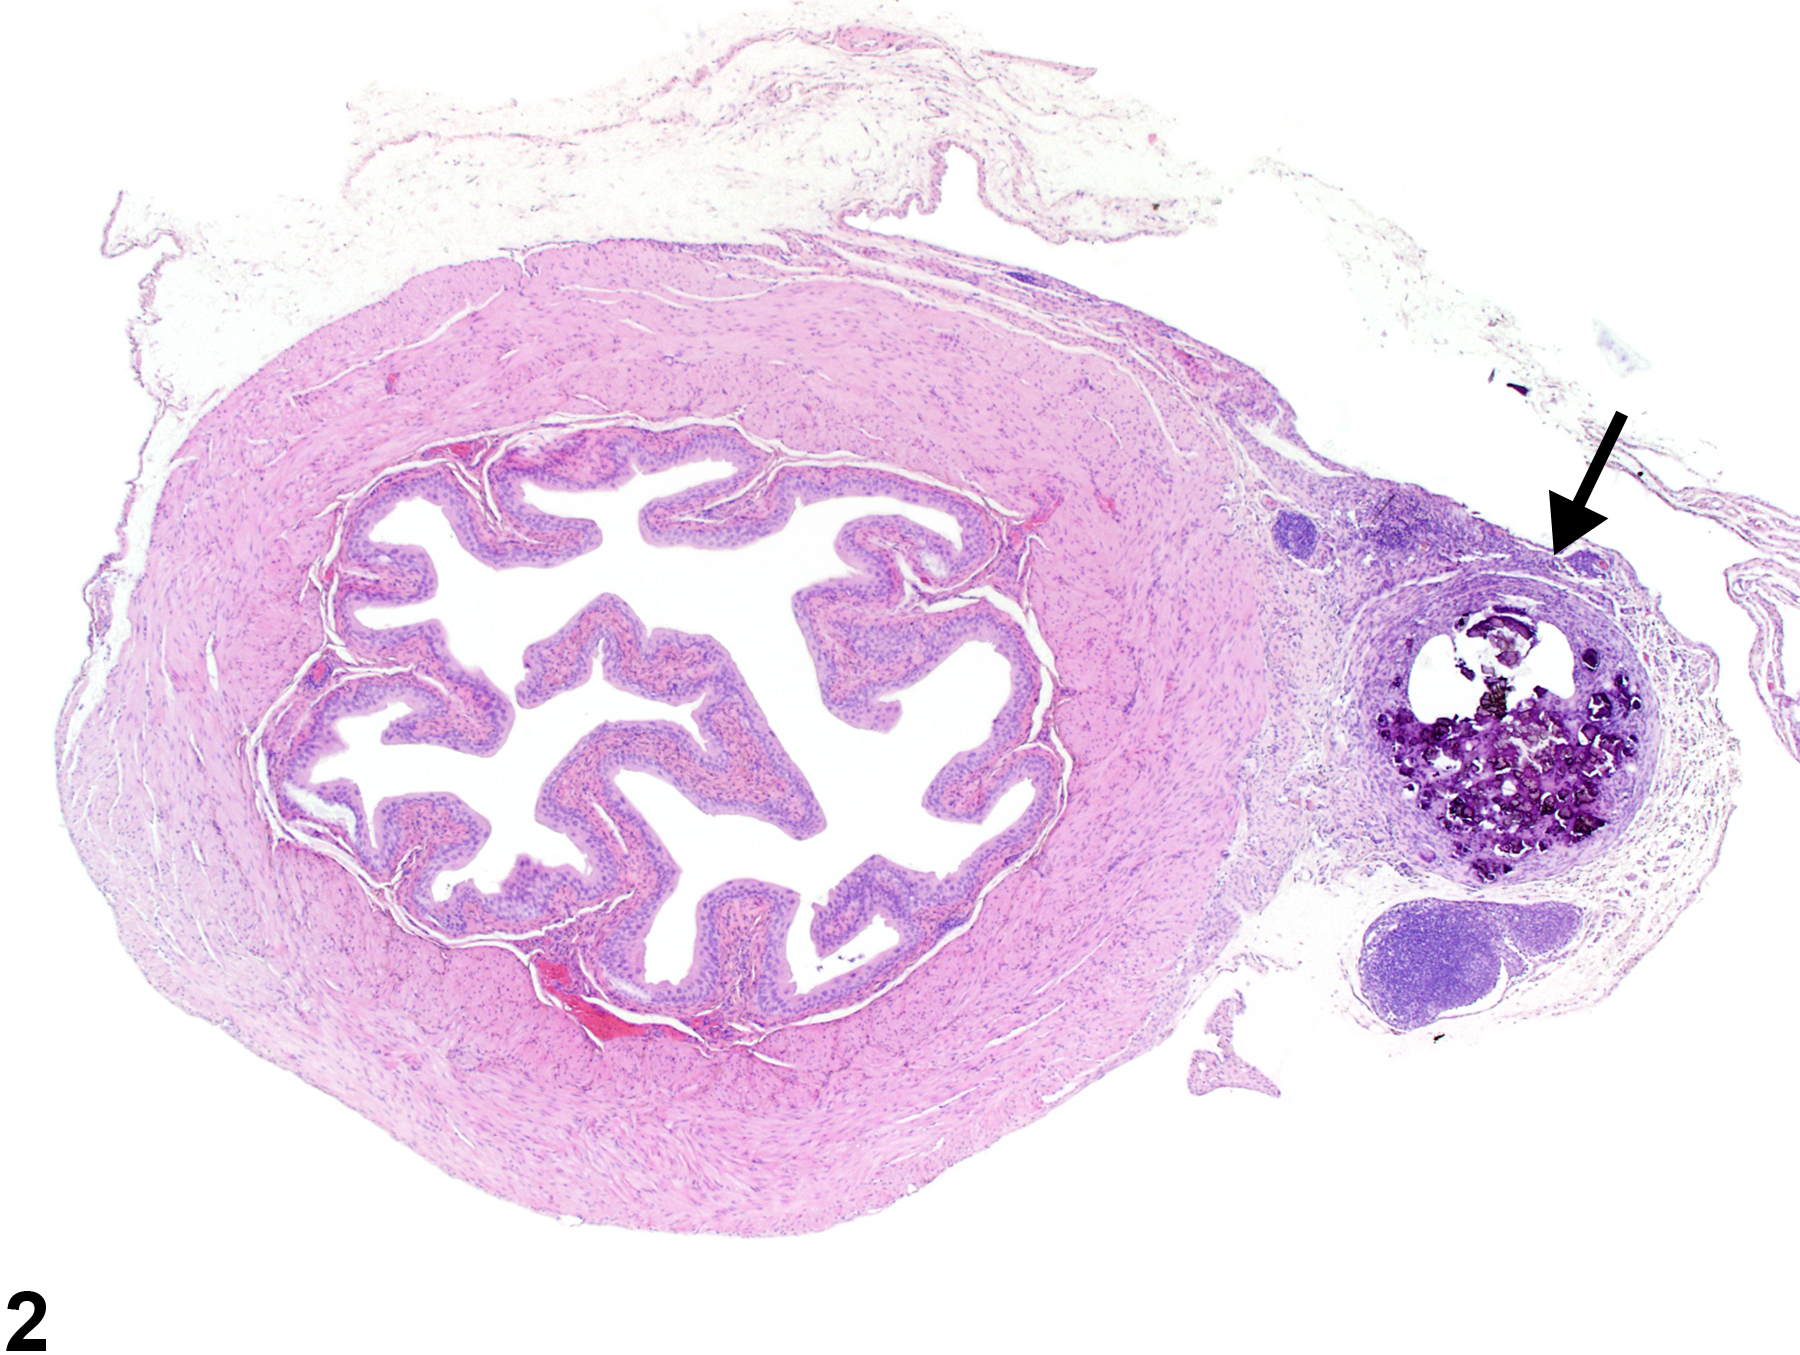 Image of mineralization in the urinary bladder from a female B6C3F1 mouse in a subchronic study